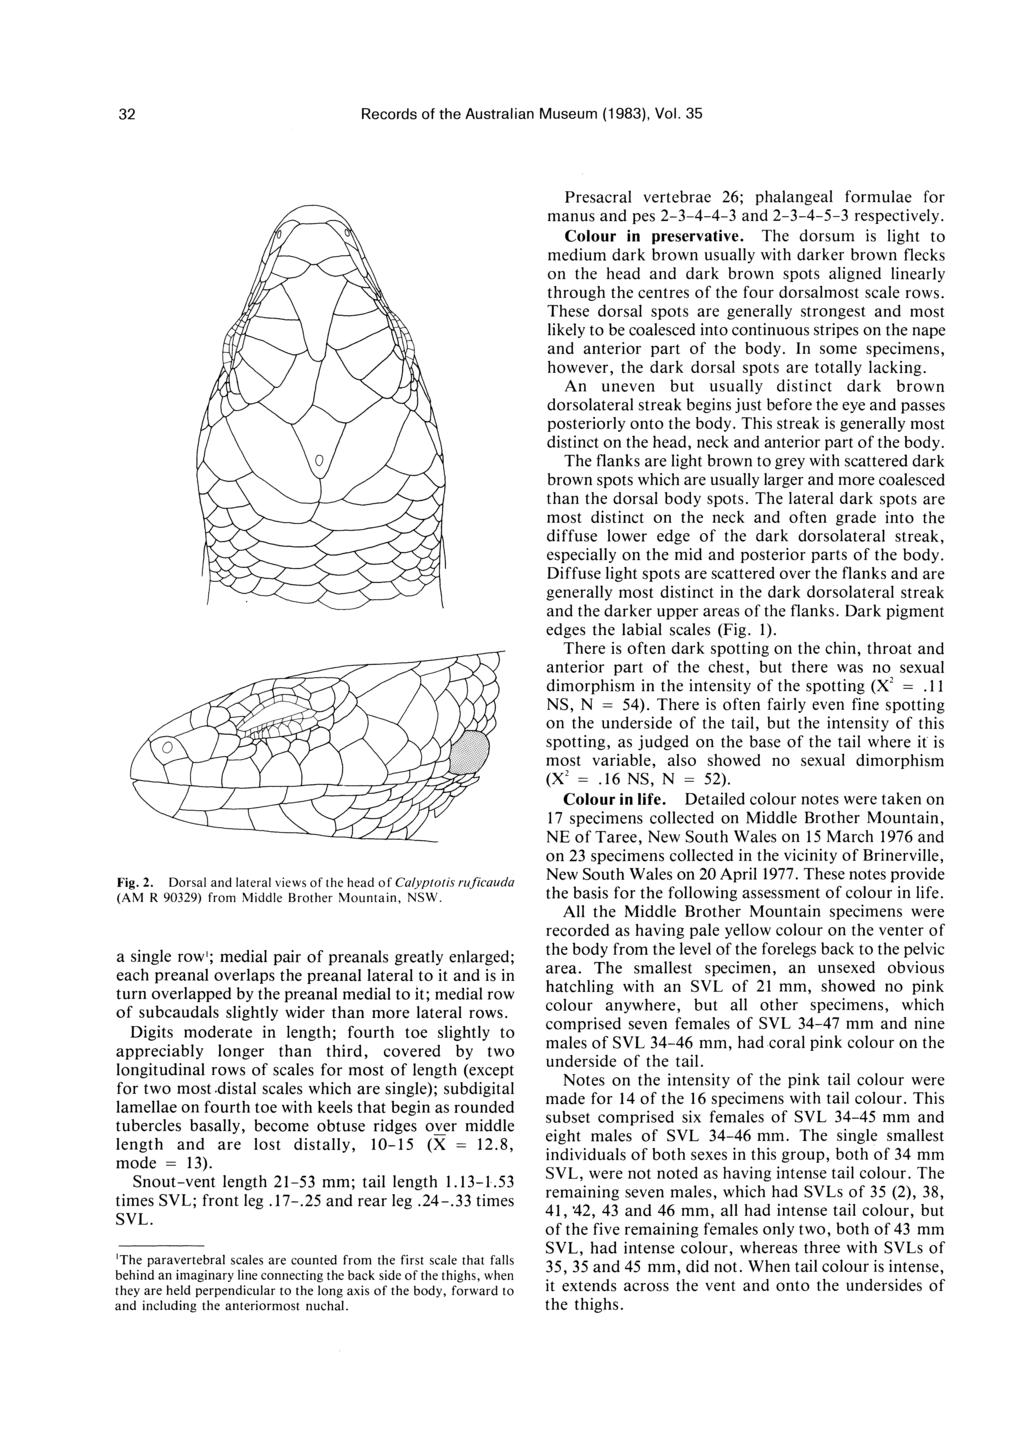 32 Records of the Australian Museum (1983), Vol. 35 Fig. 2. Dorsal and lateral views of the head of Calyplolis rlljicallda (AM R 90329) from Middle Brother Mountain, NSW.